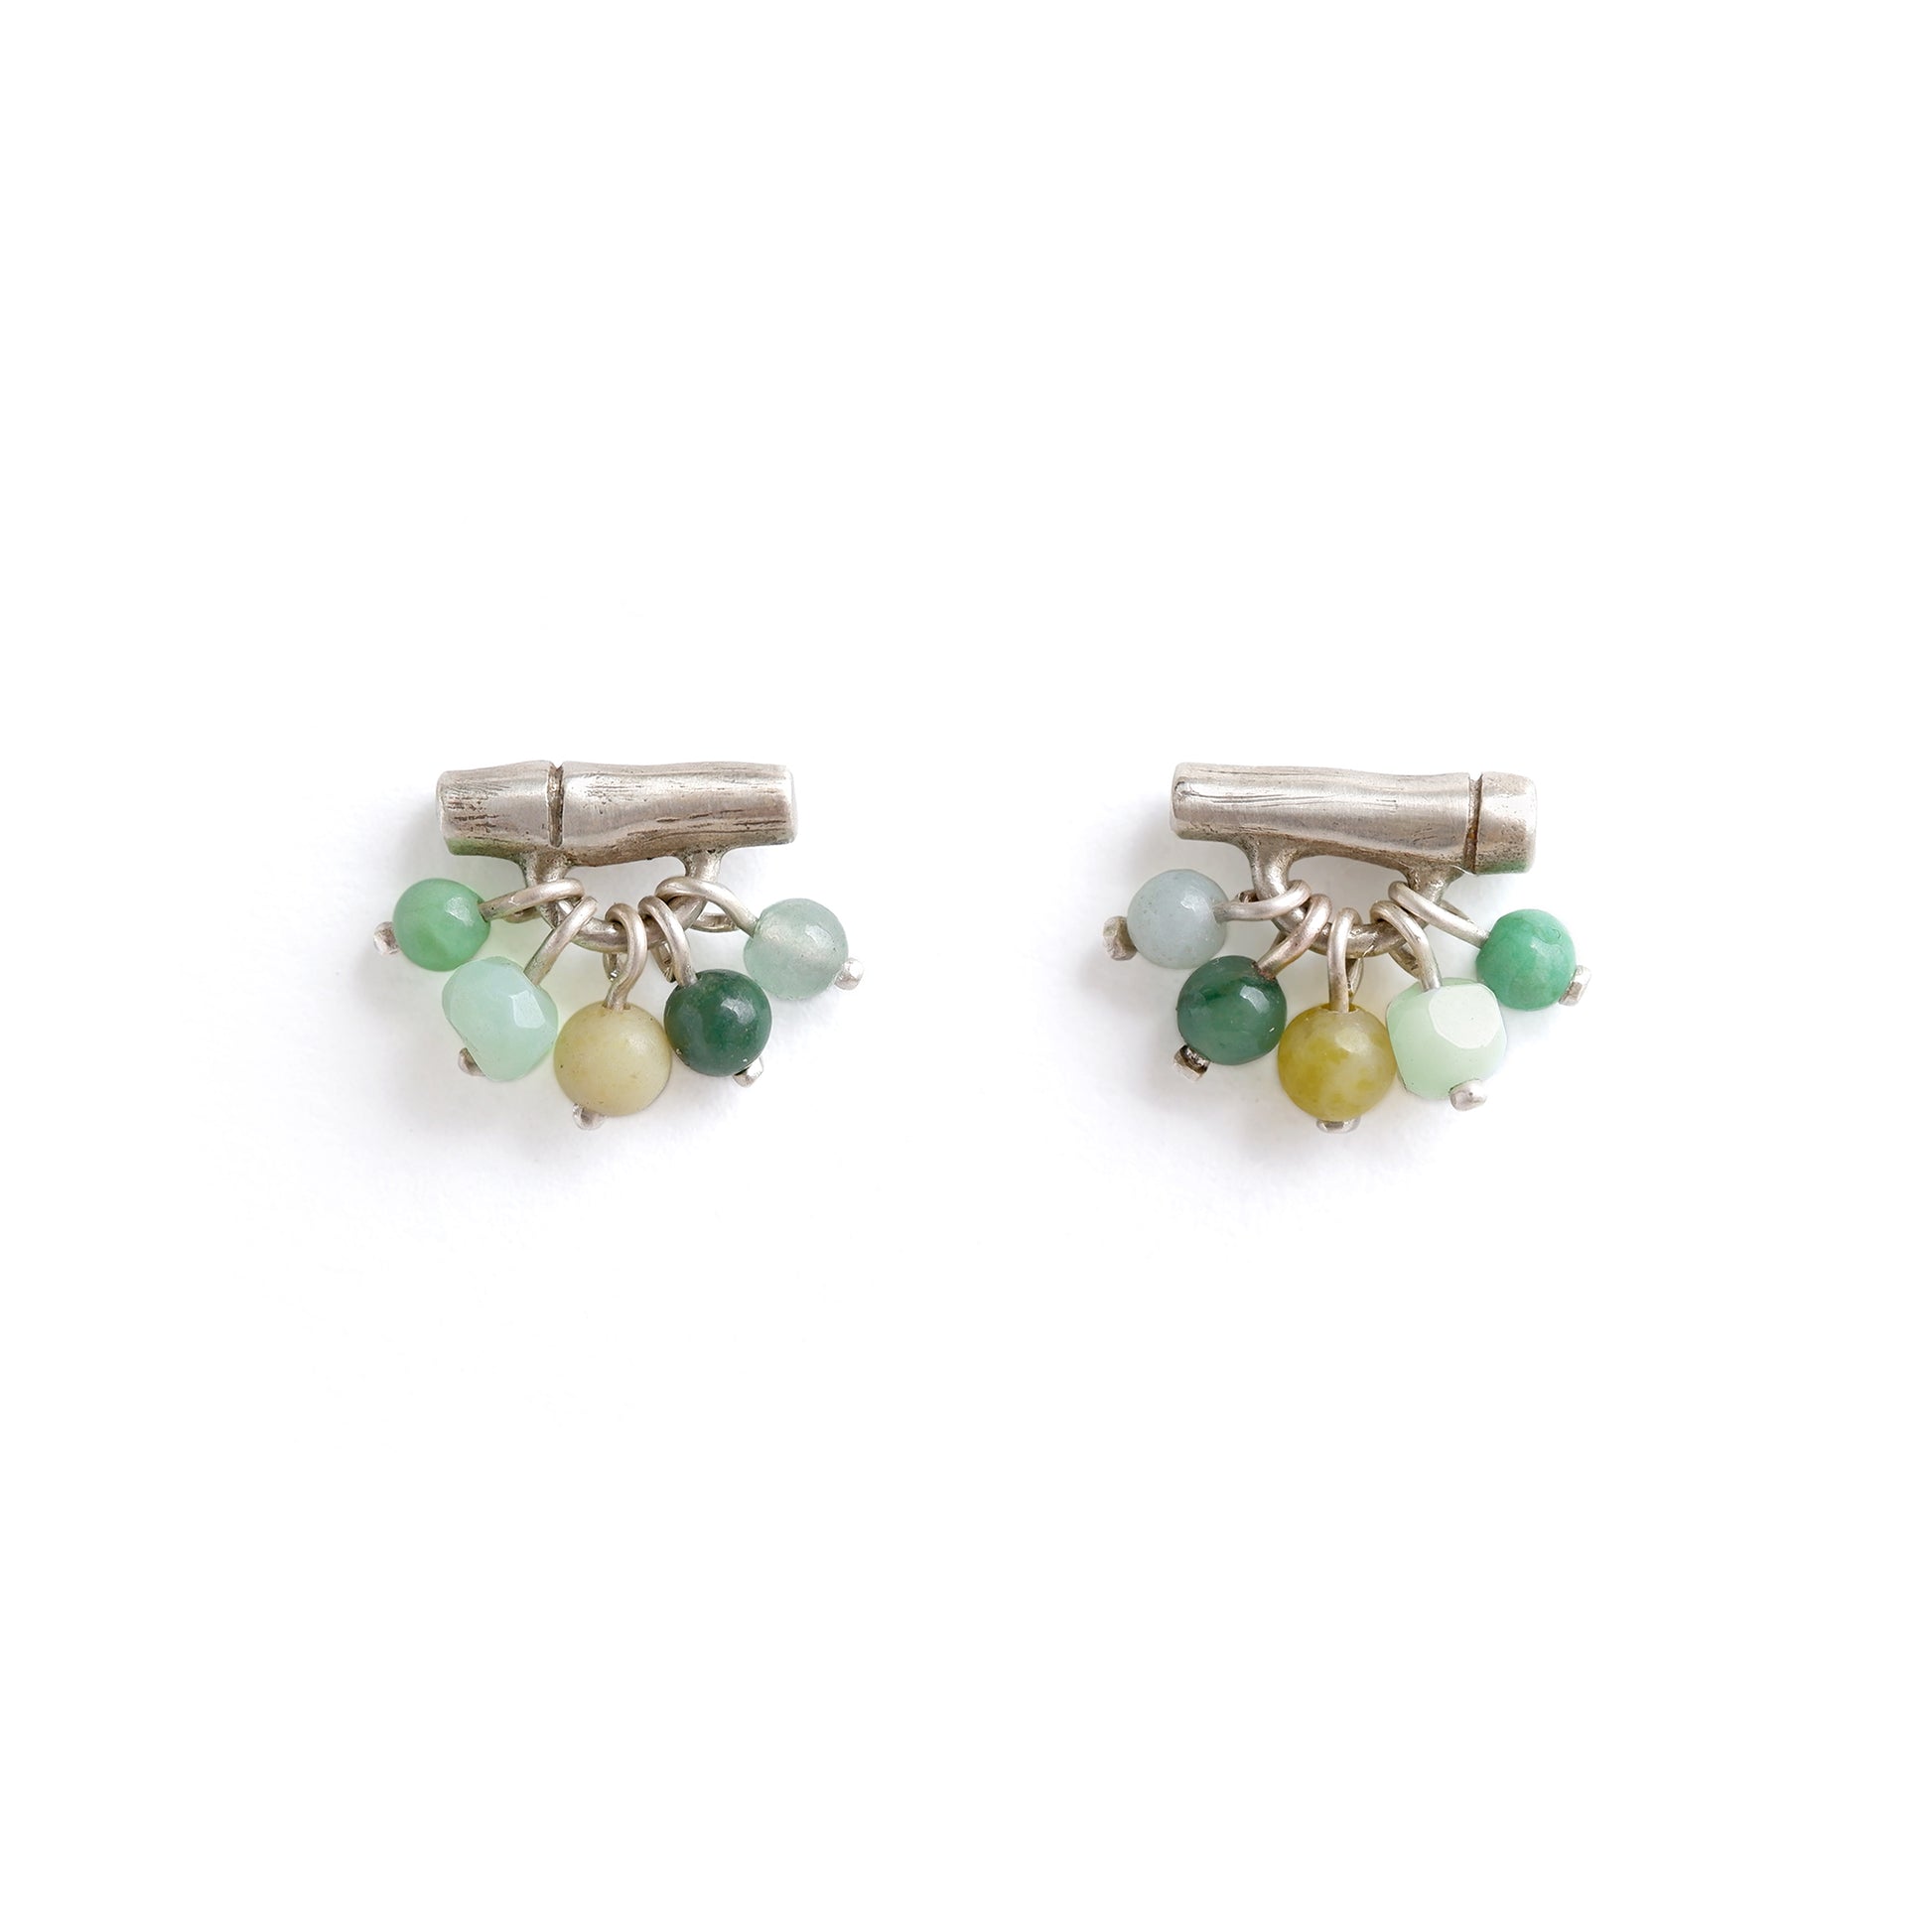 Sterling Silver bamboo bar stud earrings with gemstone beads in green, white background